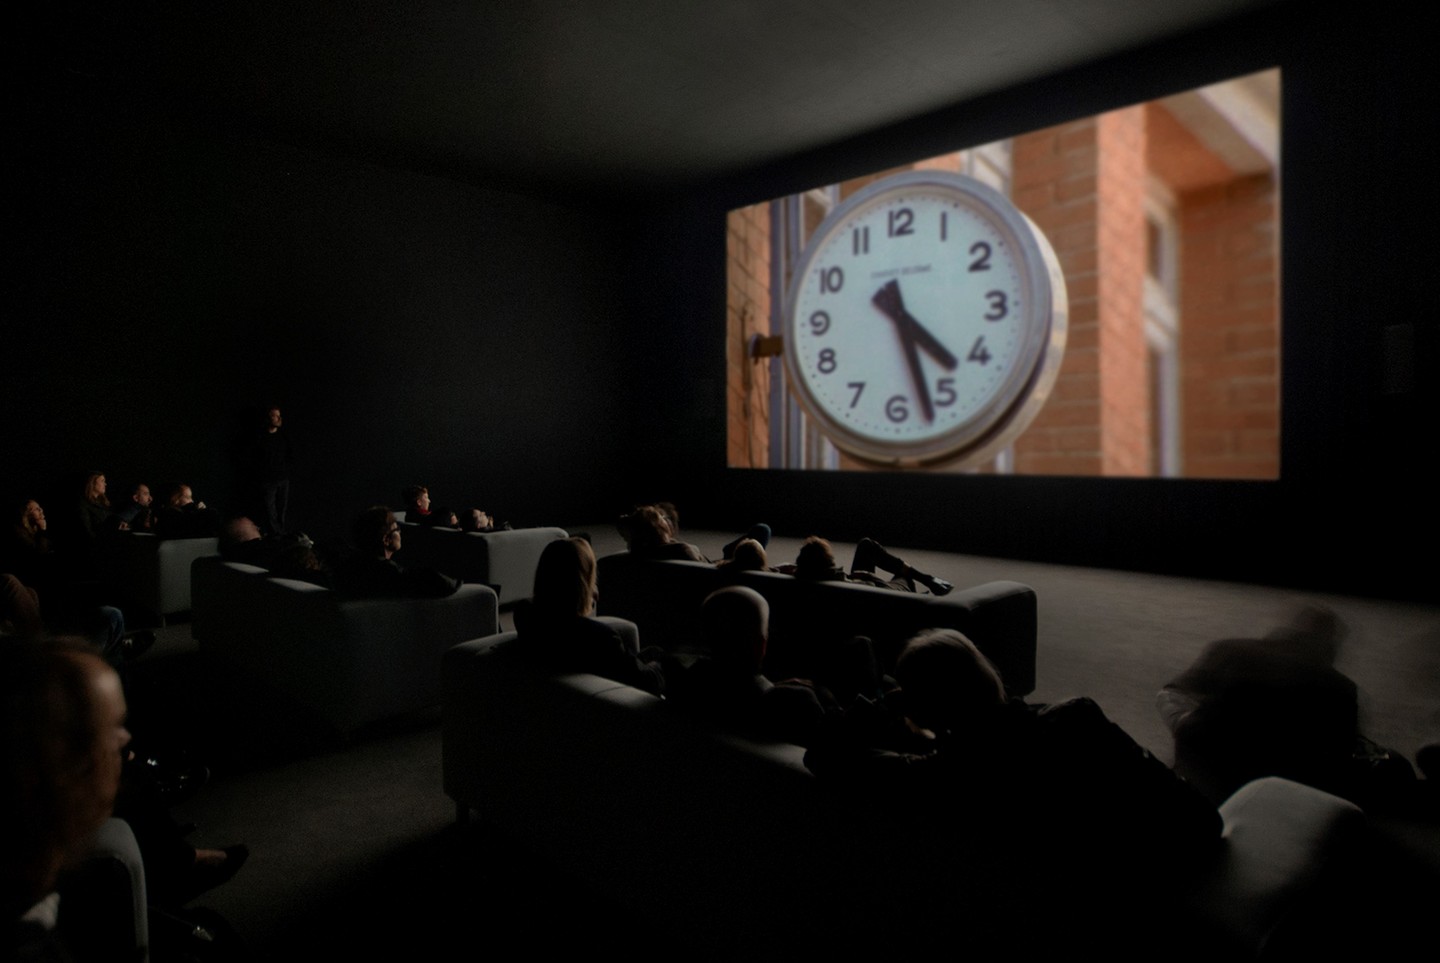 Christian Marclay, Installation view of The Clock, 2010. Courtesy of the artist